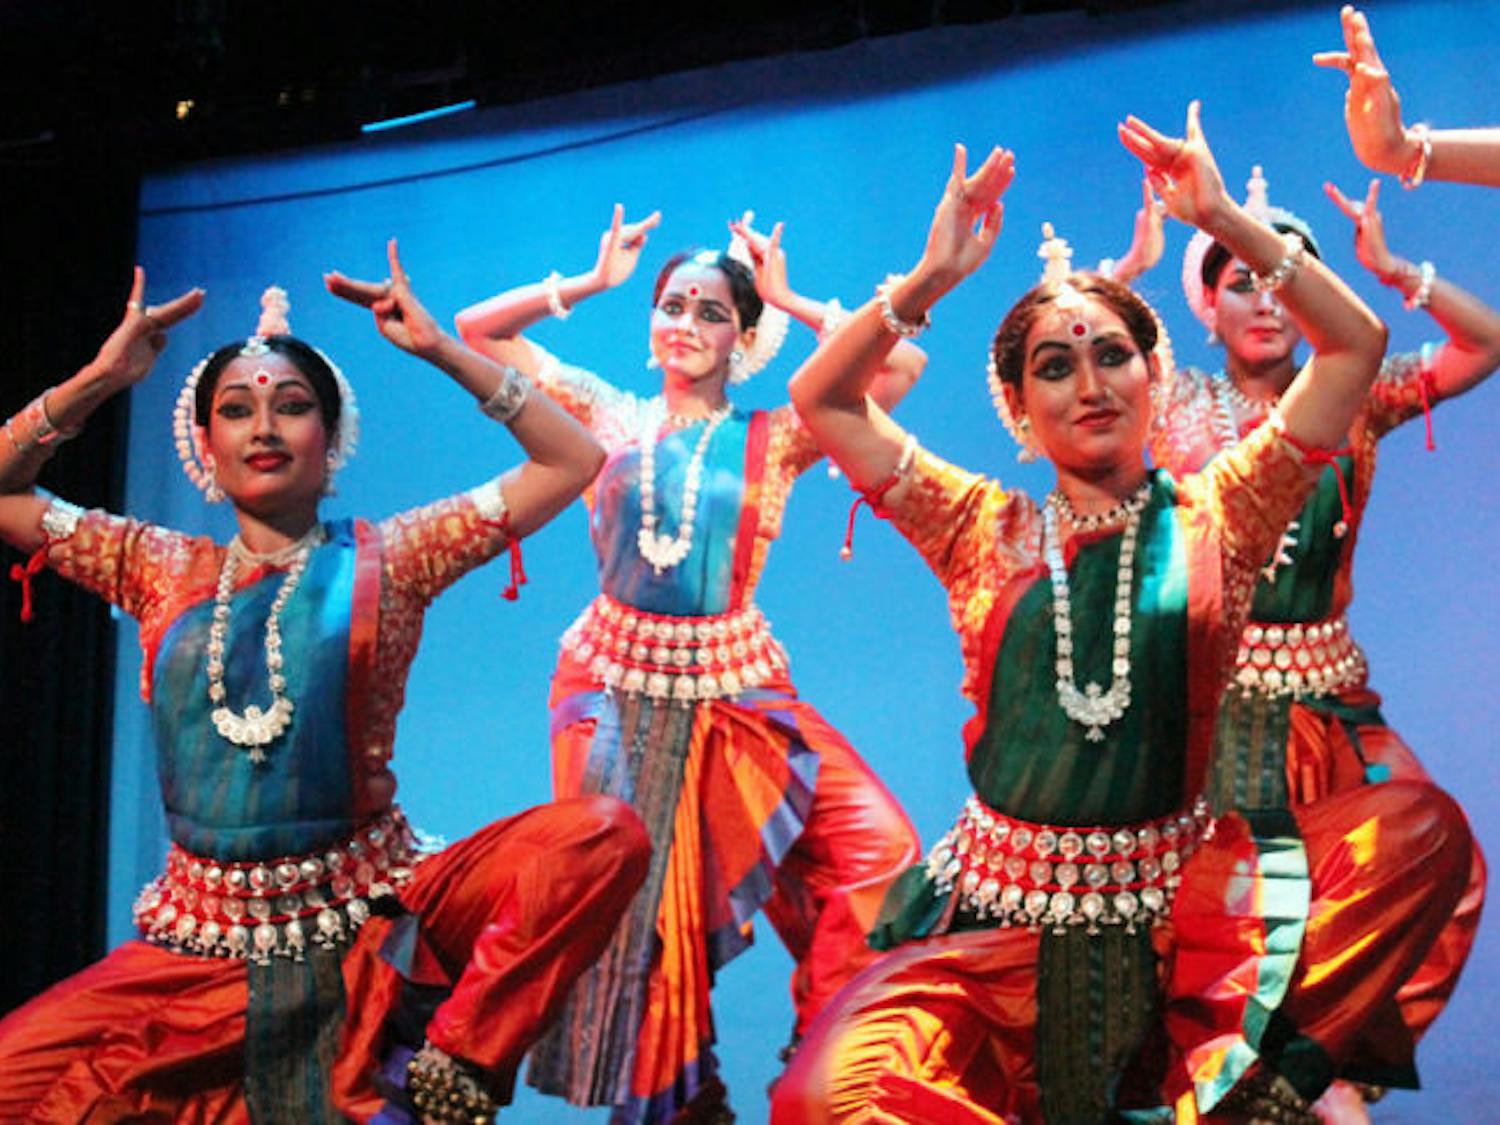 Dancers of the Orissa Dance Academy perform "Gatha Odissi,” an Indian classical dance in Odissi style, at P. K. Yonge Developmental Research School on Friday. The group consisted of 11 dancers from India.